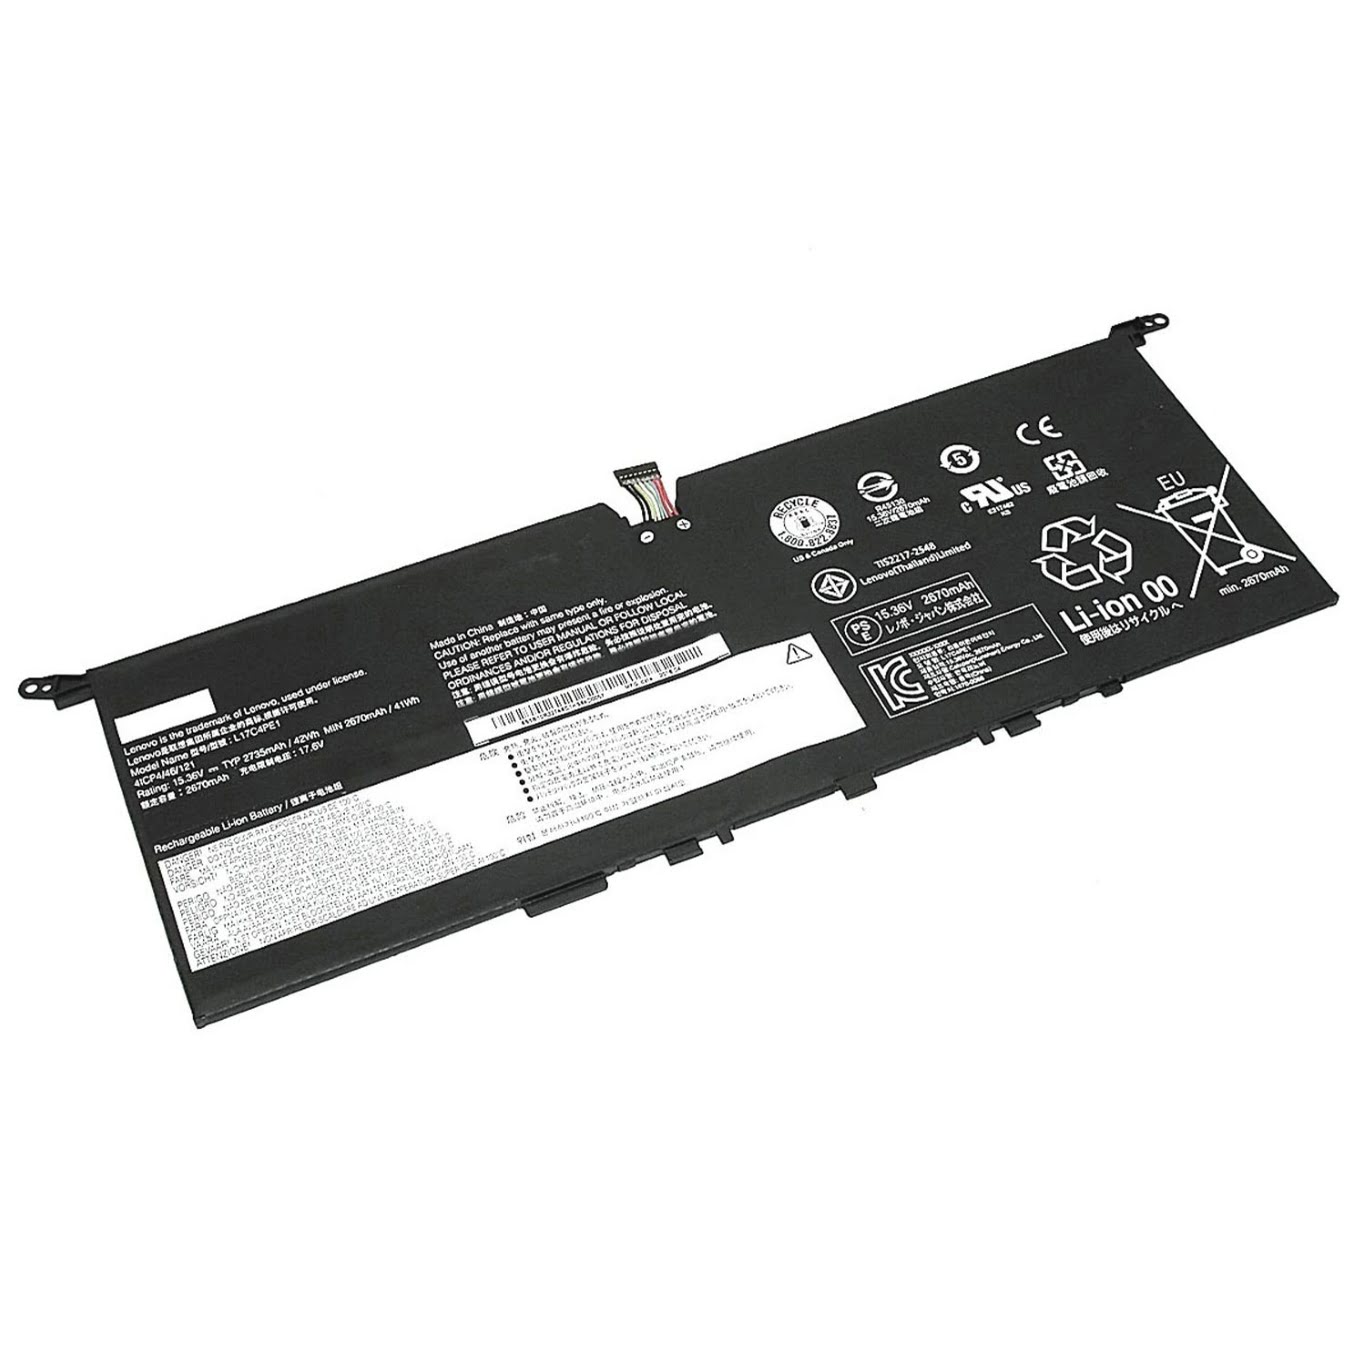 5B10R32748, 928QA232H replacement Laptop Battery for Lenovo IdeaPad 730S 13, IdeaPad 730S-13IWL, 15.36v, 2735mah / 42wh, 4 cells